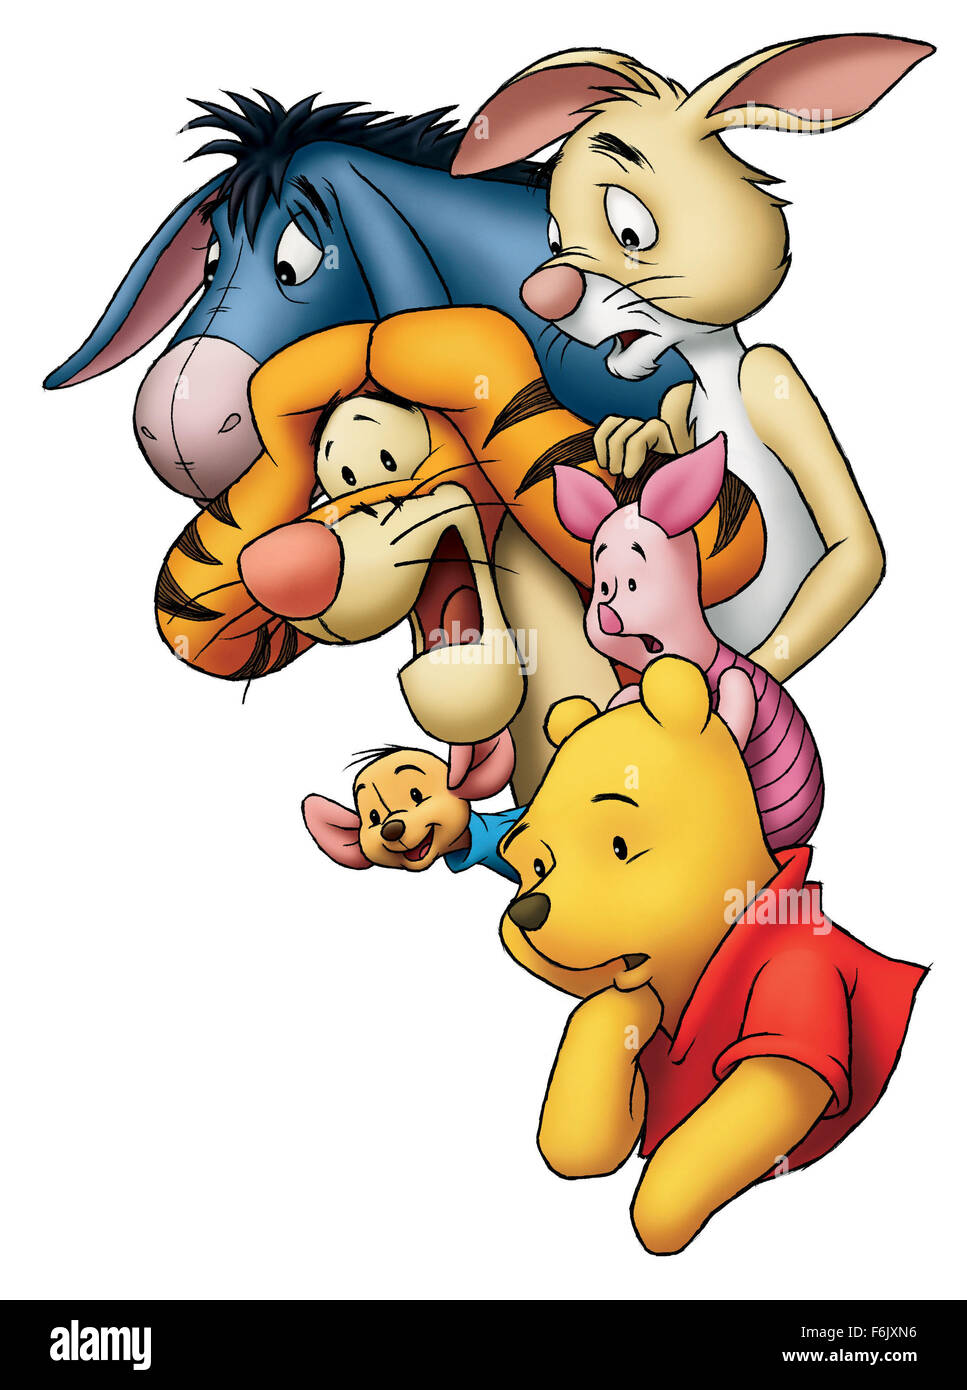 RELEASE DATE: February 11, 2005   MOVIE TITLE: Pooh's Heffalump Movie   STUDIO: Walt Disney Pictures   PLOT: A heffalump is heard trumpeting in the hundred acre woods. Winnie the Pooh, Tigger, and Piglet are scared and rush to Rabbit's house for advice. Roo joins them and they all agree that Heffalumps are nearby after finding a huge footprint. They decide to set out on an expedition to catch the Heffalump. Roo is not allowed to come along because he is too little. Directed by Frank Nissen.   PICTURED: Characters from the movie.   (Credit Image: c Walt Disney Pictures/Entertainment Pictures/ZU Stock Photo